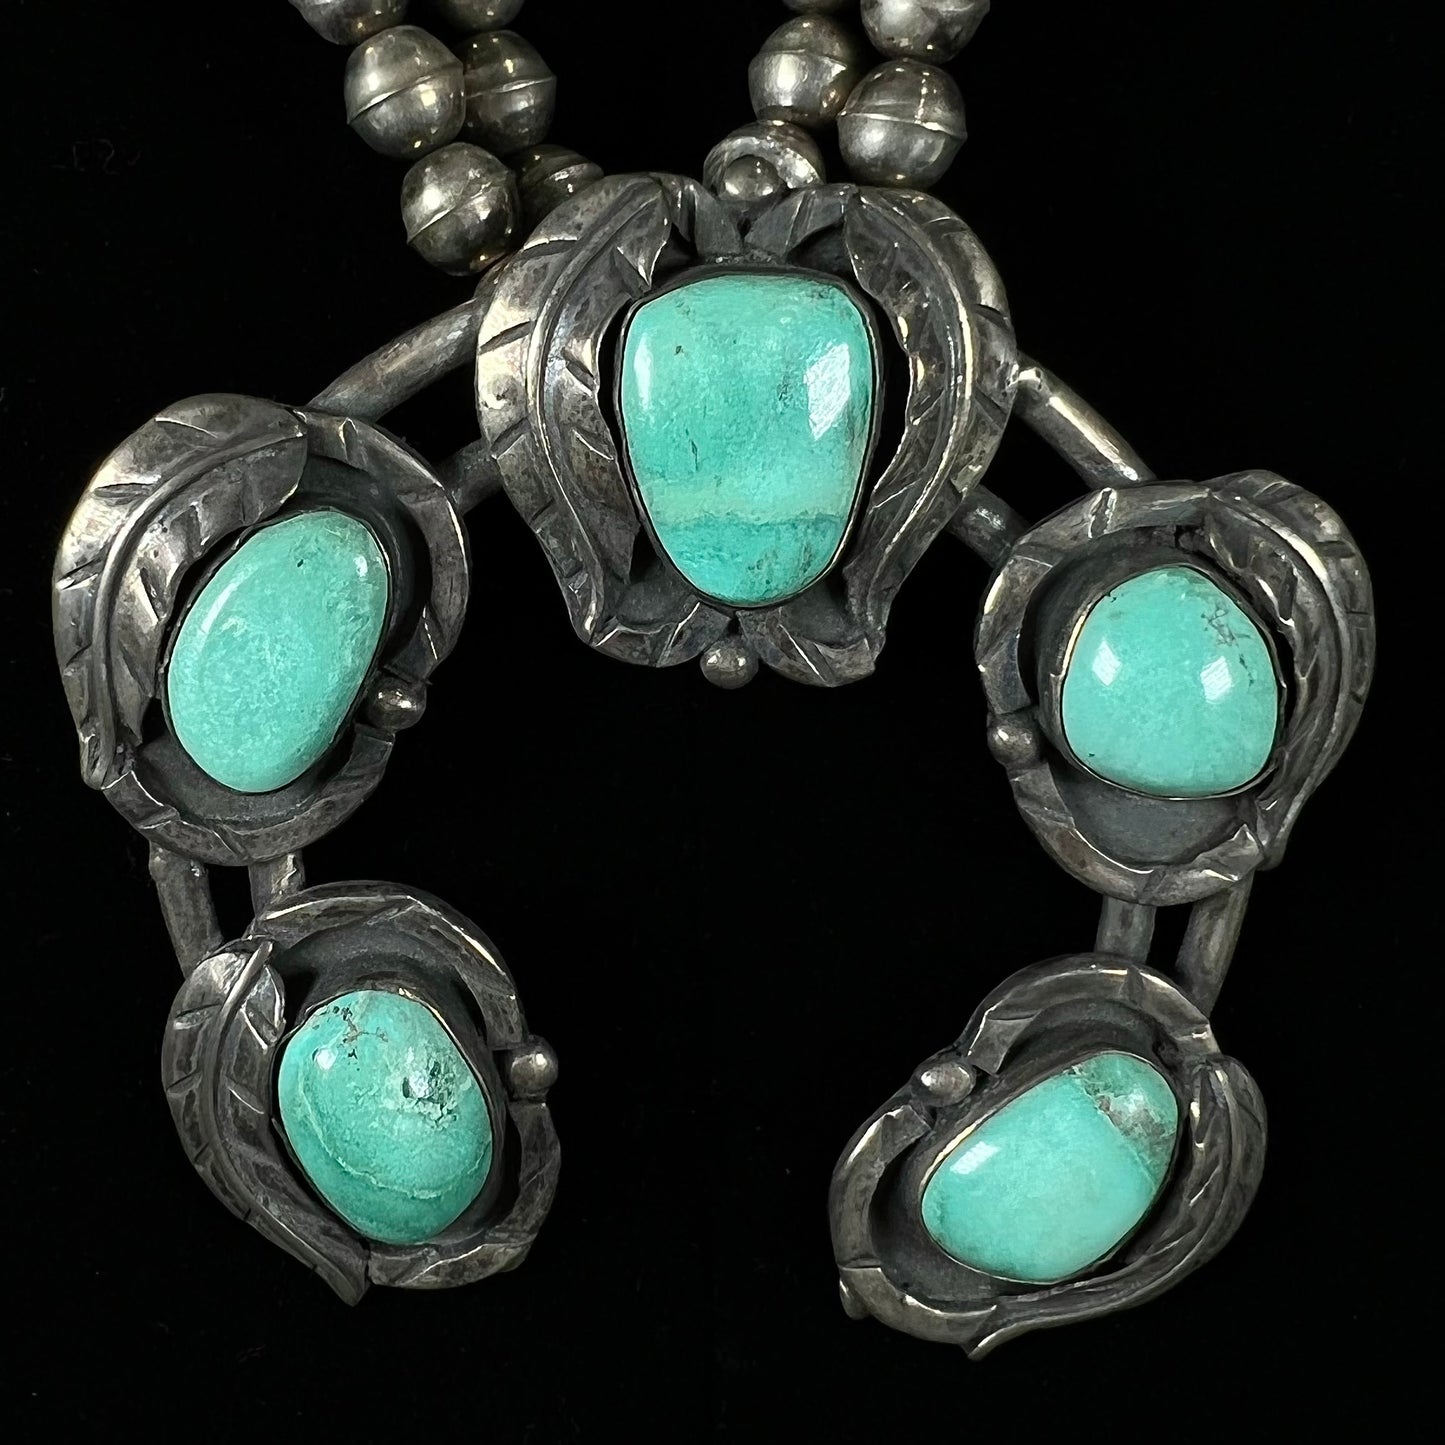 A handmade silver Navajo style squash blossom necklace set with green Kingman turquoise.